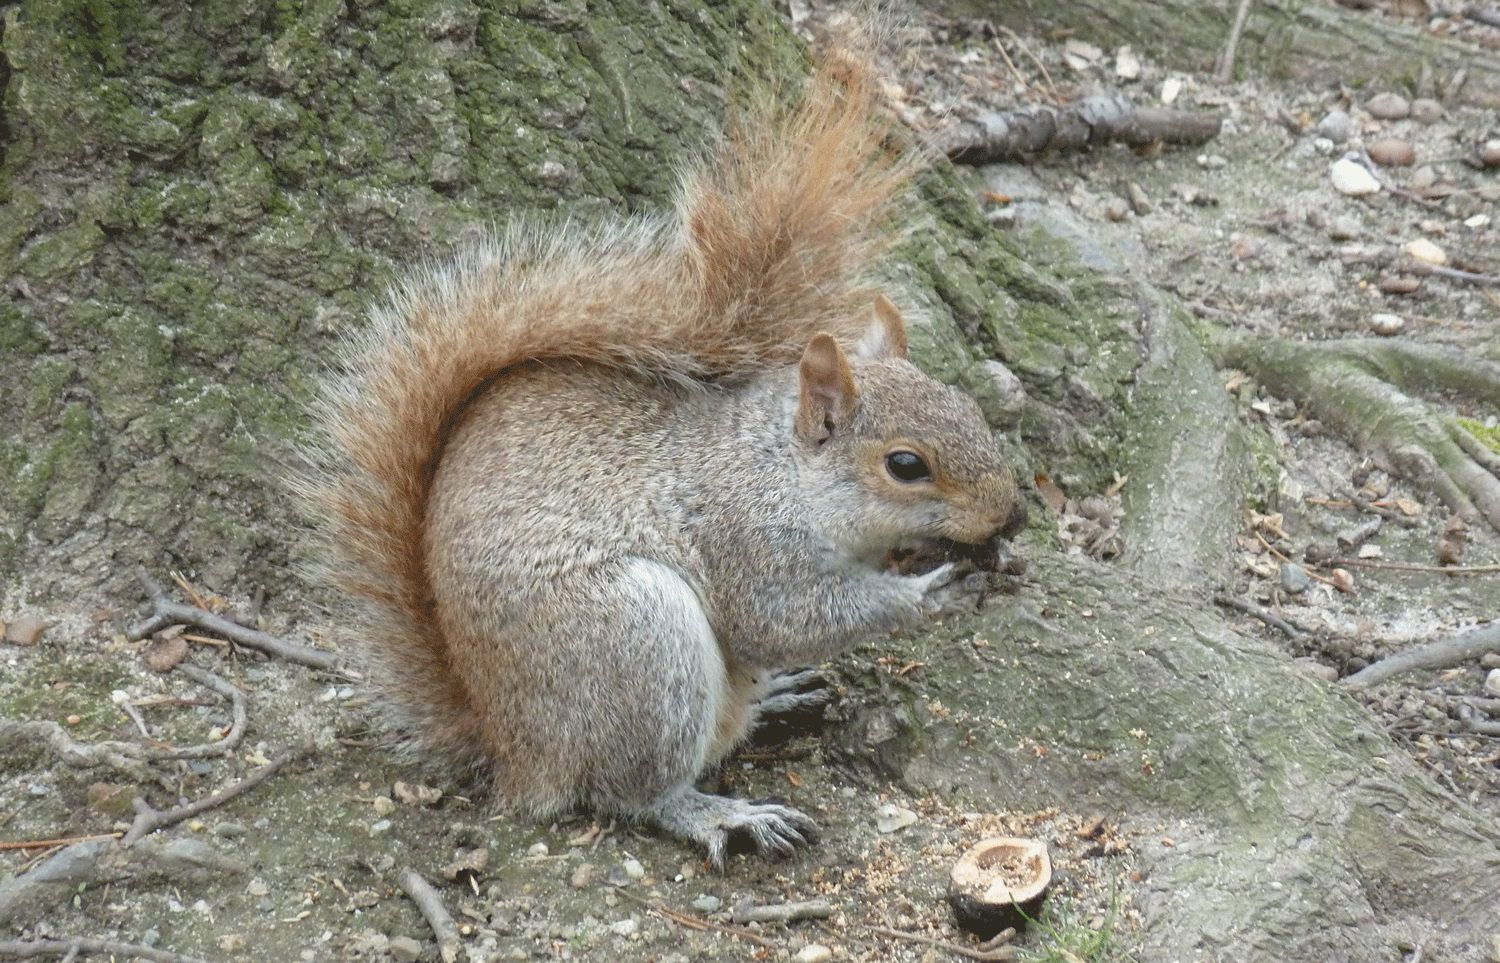 Photograph of a grey squirrel eating a nut.